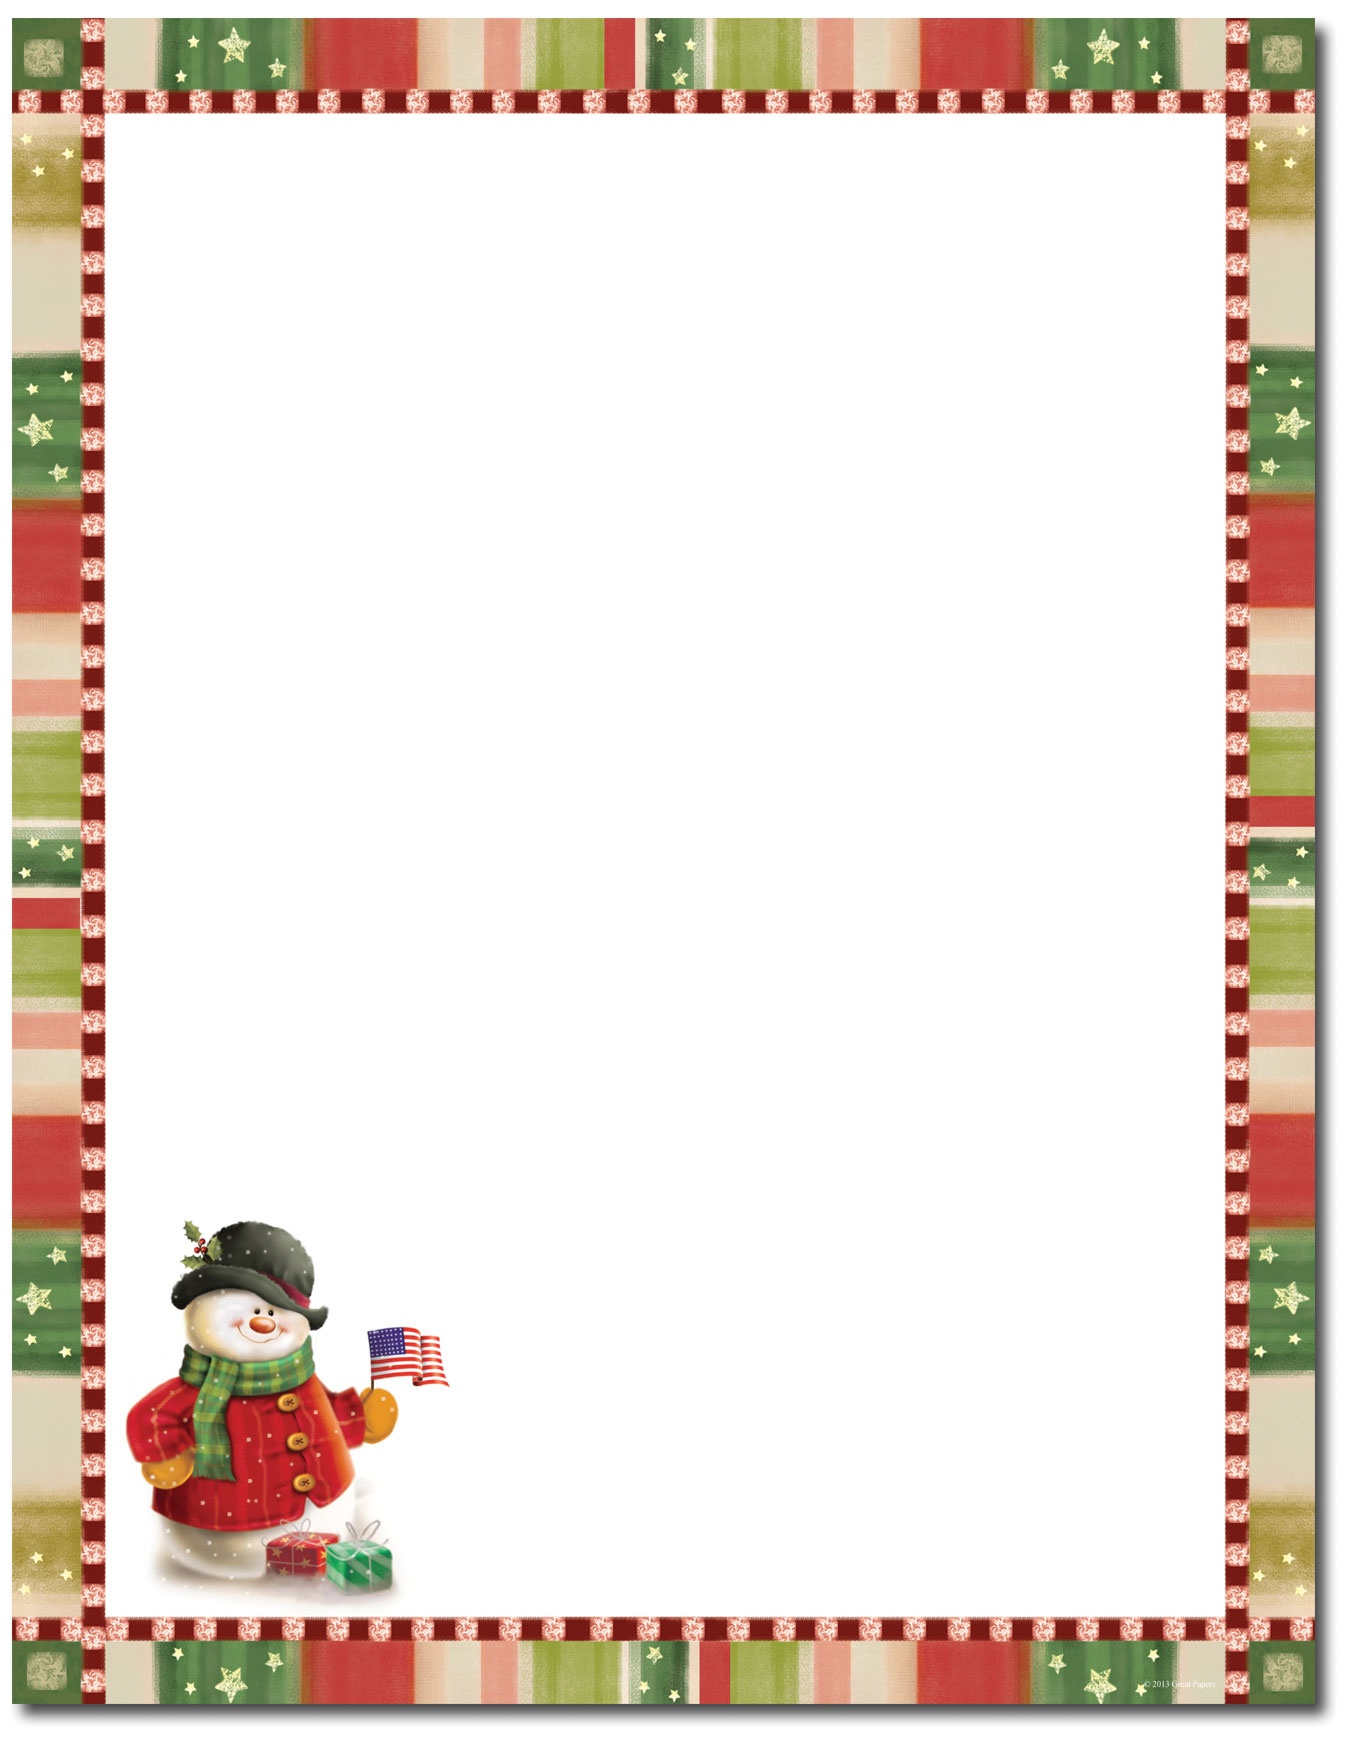 Free Christmas Stationary Cliparts, Download Free Clip Art, Free - Free Printable Christmas Stationery Paper